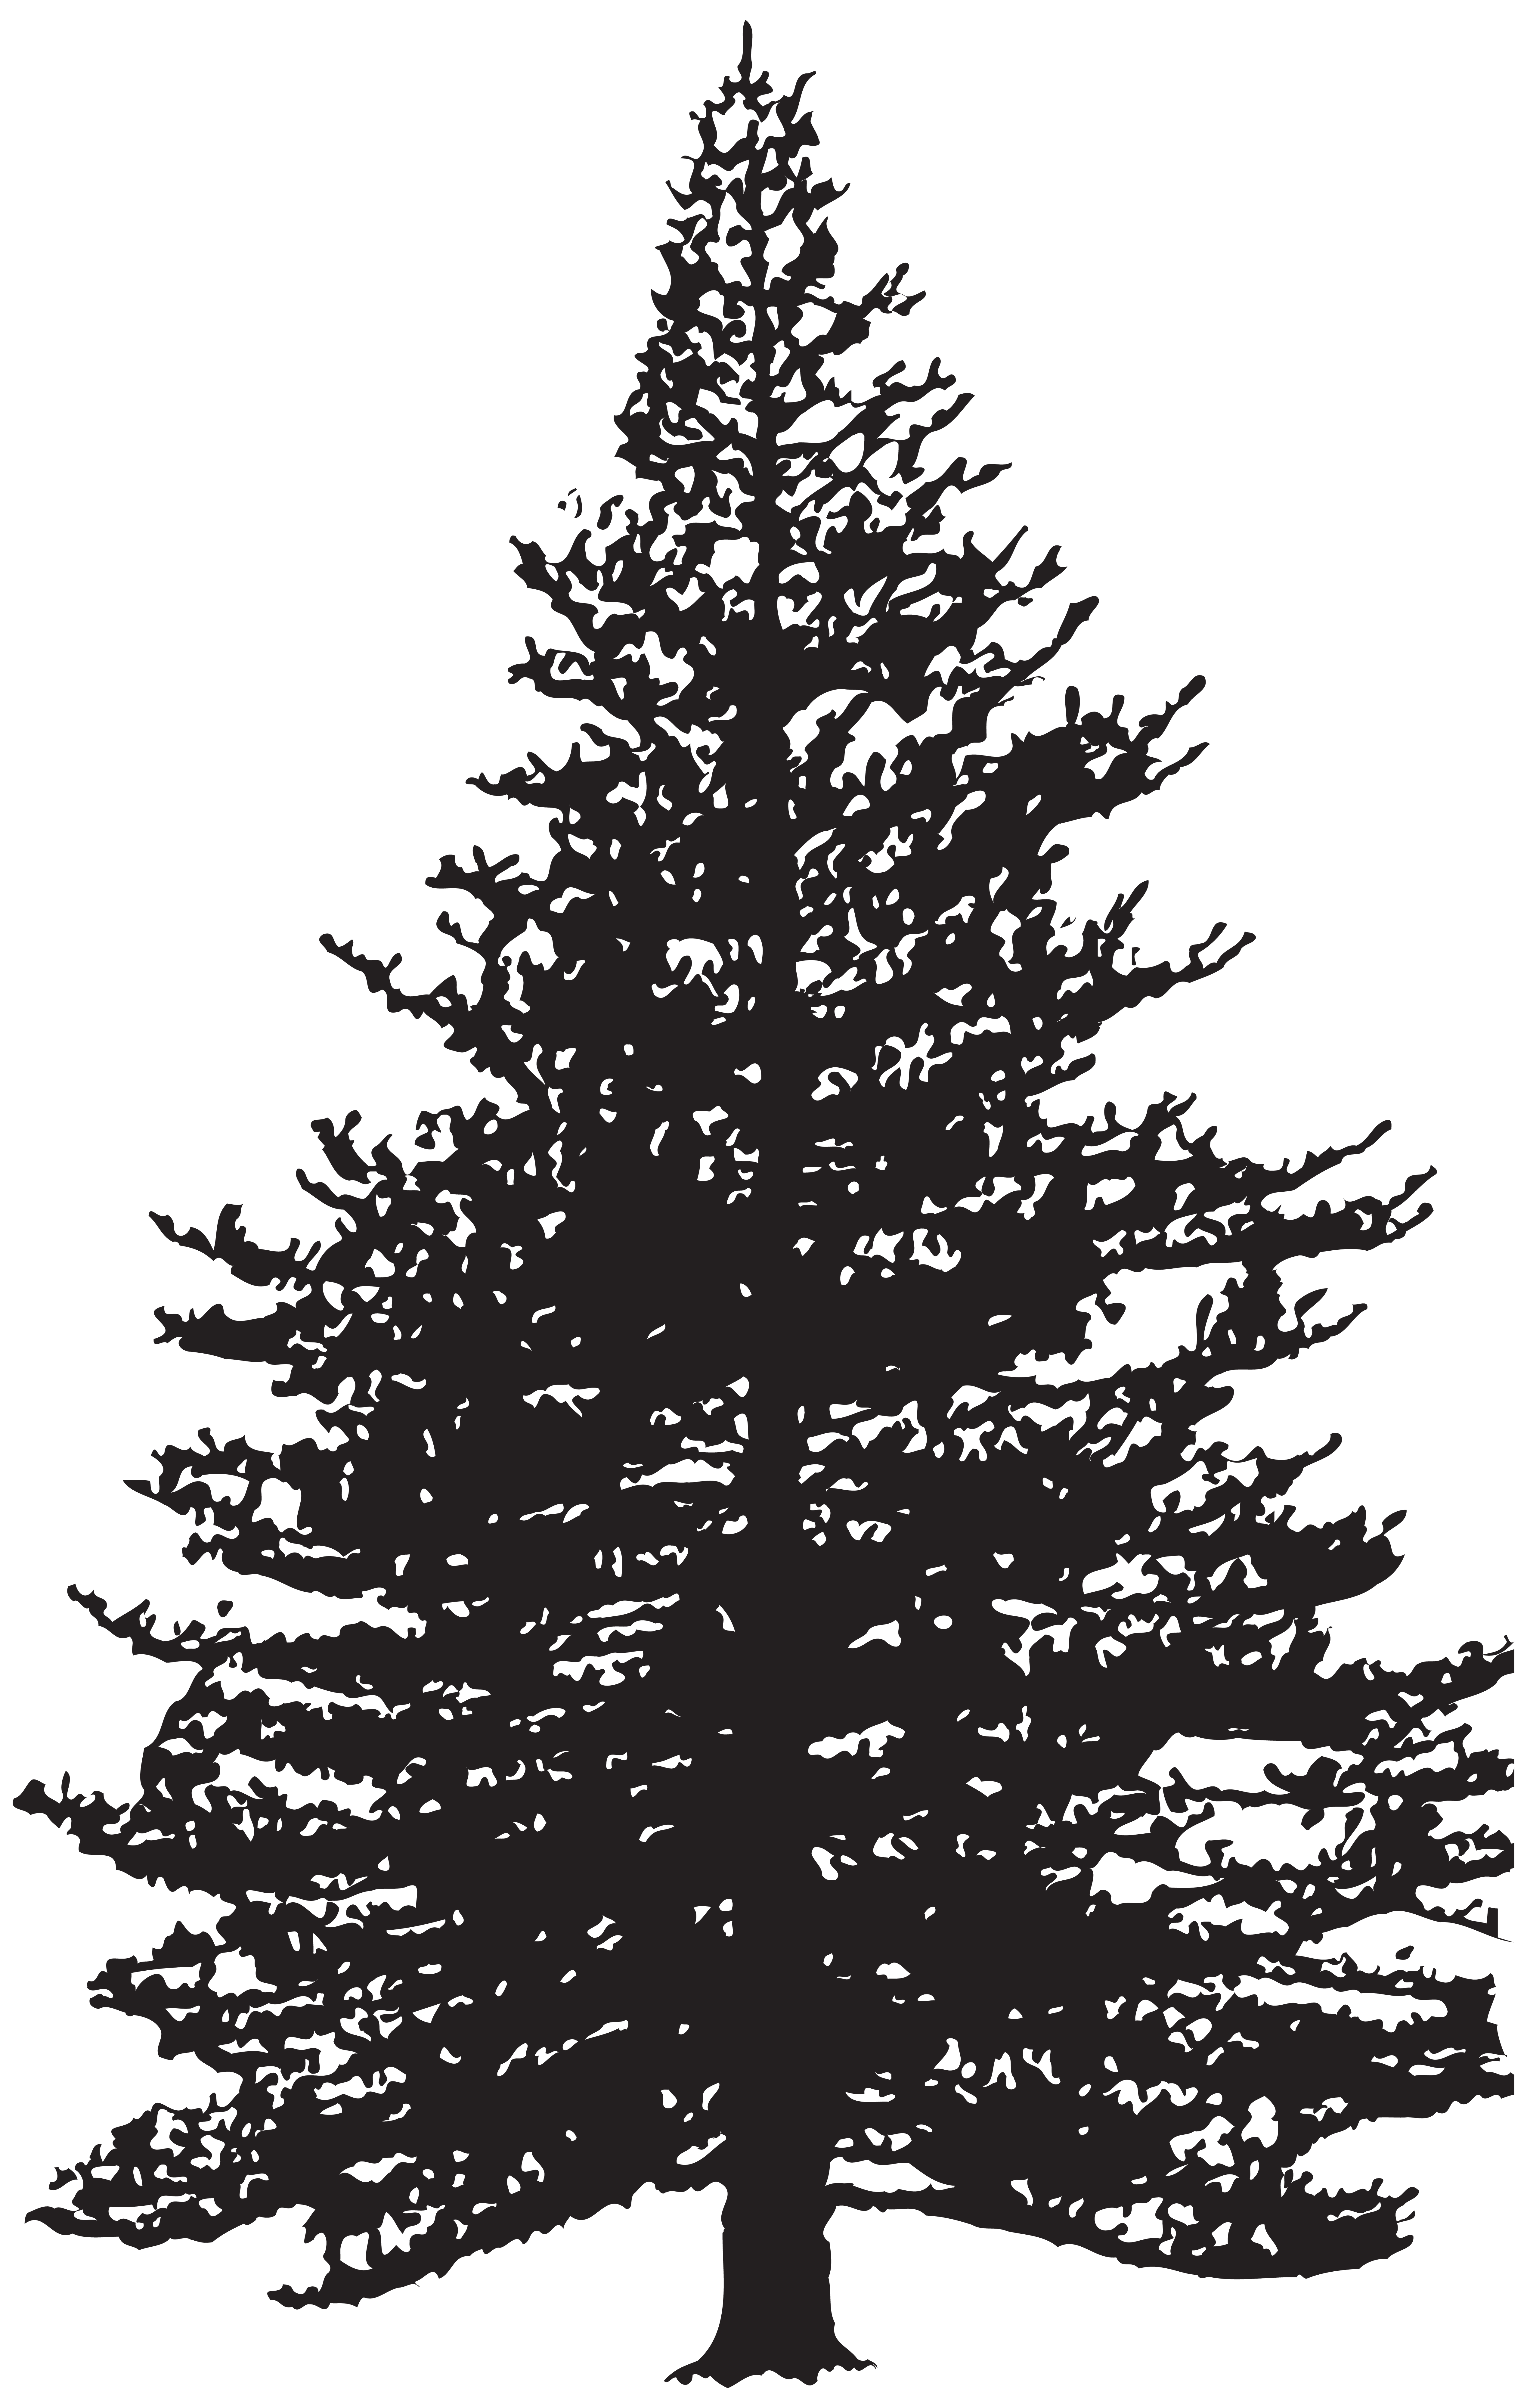 Download Tree clipart pine, Tree pine Transparent FREE for download on WebStockReview 2021